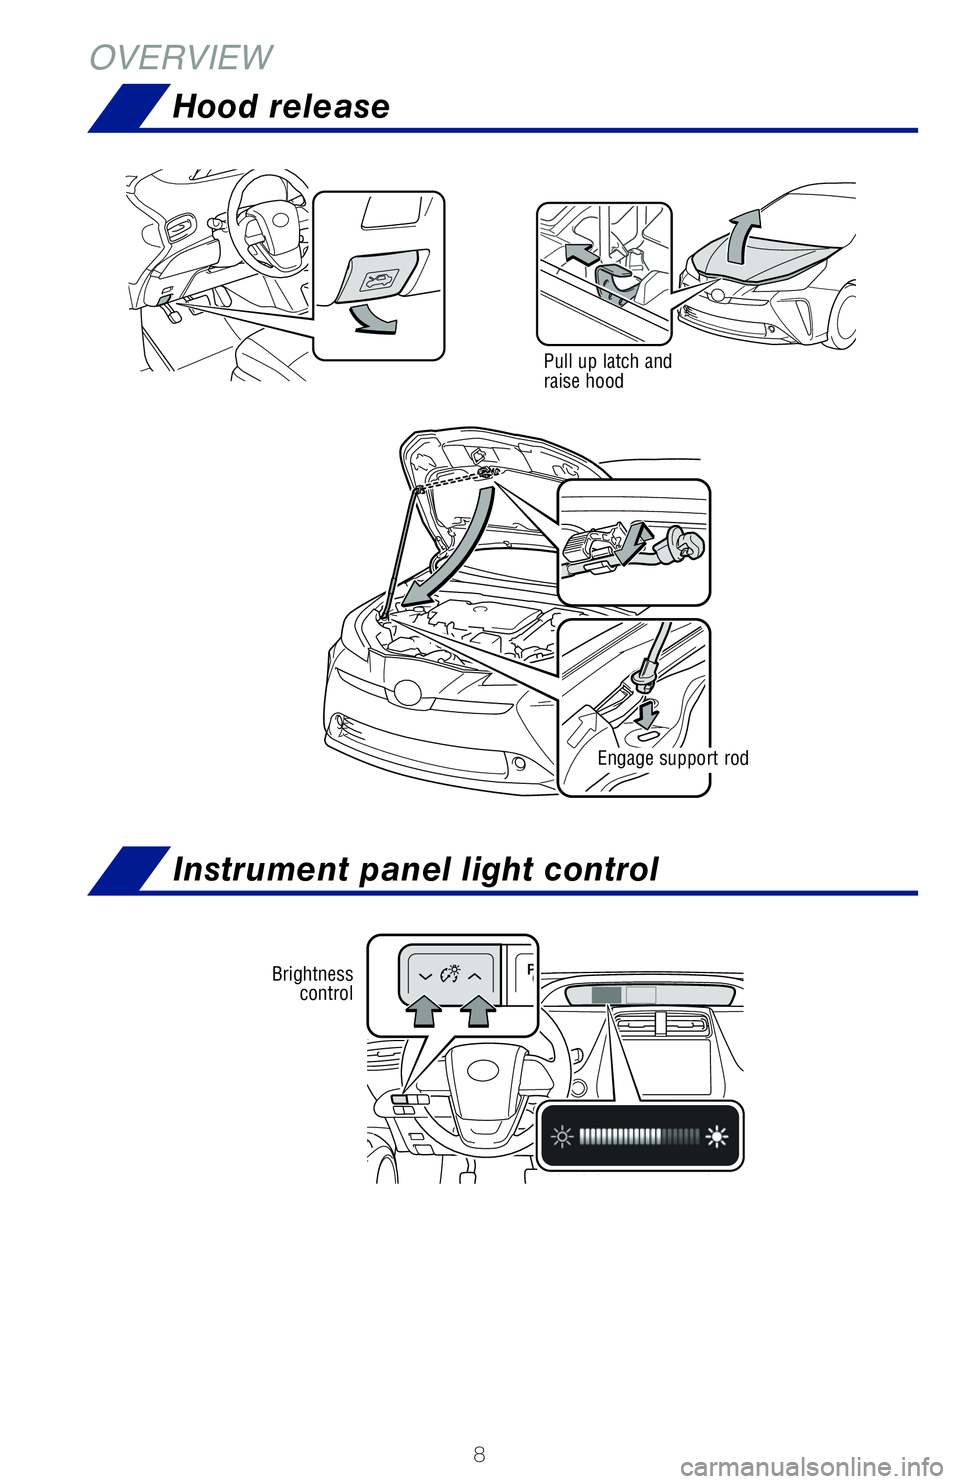 TOYOTA PRIUS 2020  Owners Manual (in English) 8
Instrument panel light control
Hood release
OVERVIEW
Pull up latch and 
raise hood
Engage support rod
Brightness control
62443_MY20_Prius_Text.indd   88/22/19   7:34 PM 